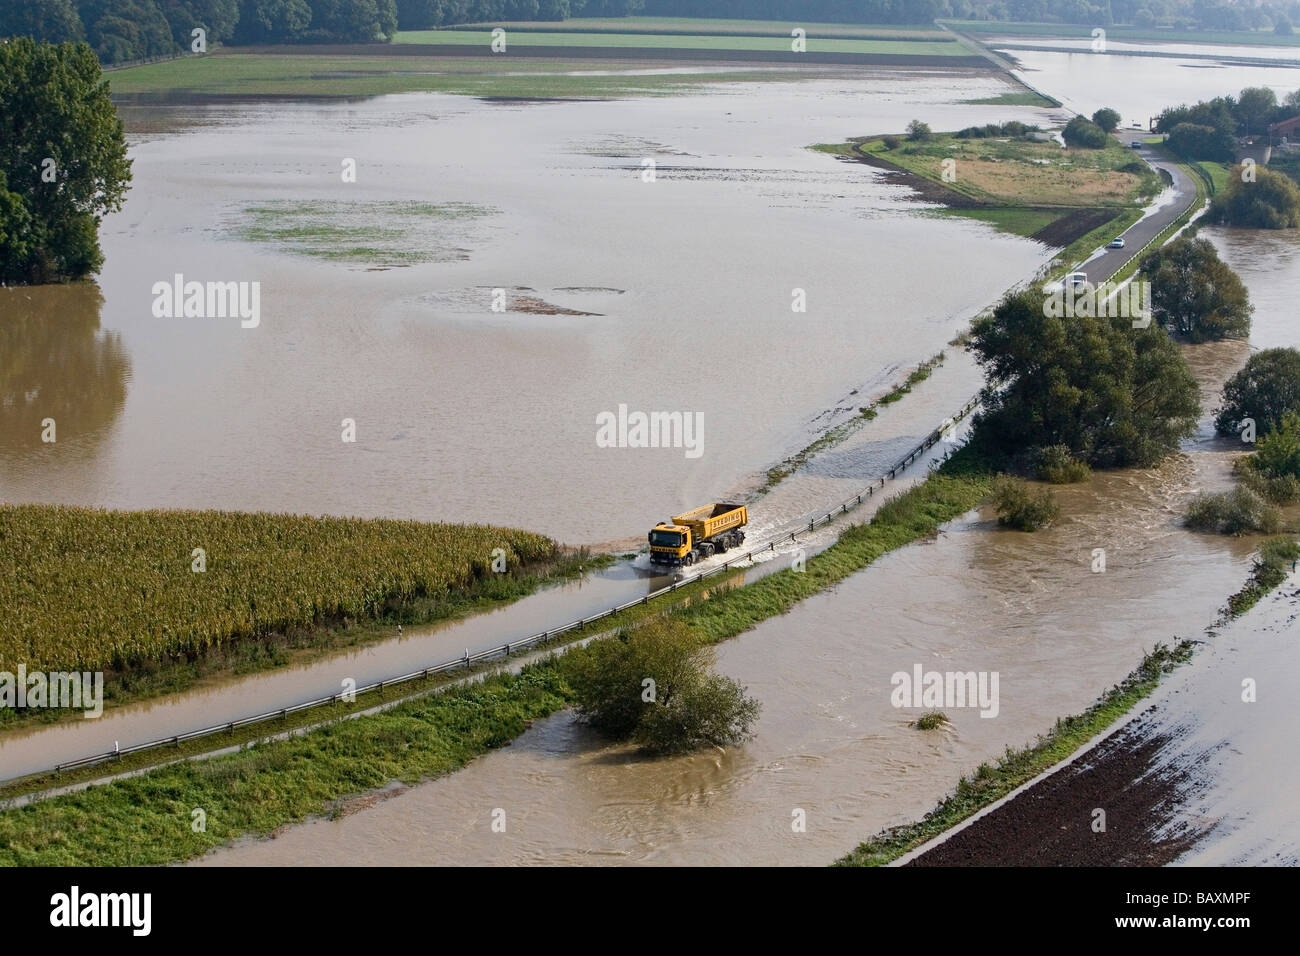 aerial view of truck driving through floodwaters, farmland, Leine River in the Hanover region, Lower Saxony, northern Germany Stock Photo